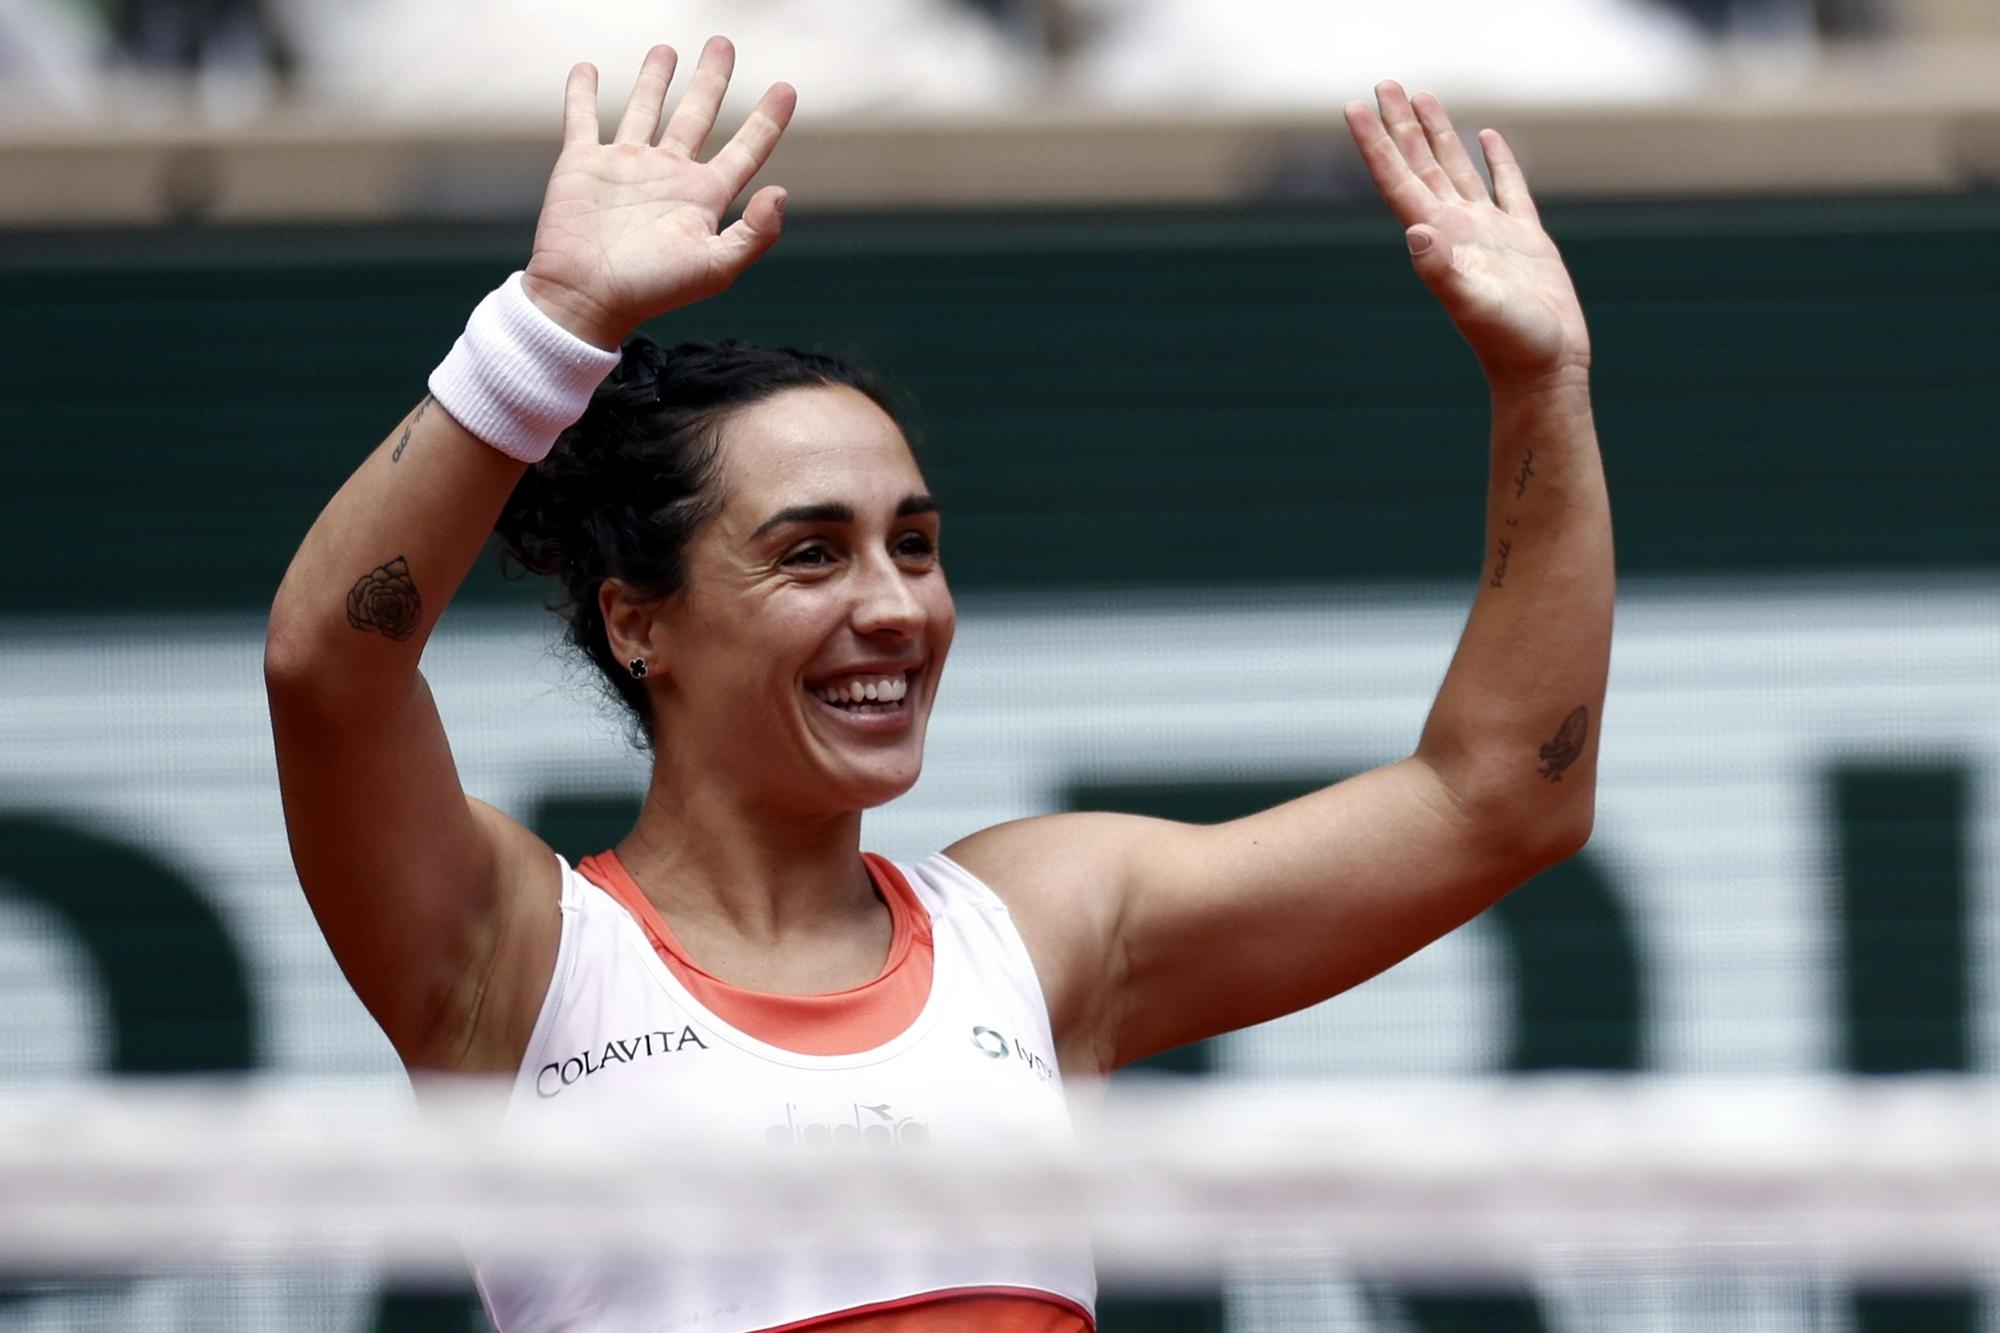 epa09987658 Martina Trevisan of Italy reacts after winning against Leylah Annie Fernandez of Canada in their women’s quarterfinal match during the French Open tennis tournament at Roland ?Garros in Paris, France, 31 May 2022. EPA/YOAN VALAT